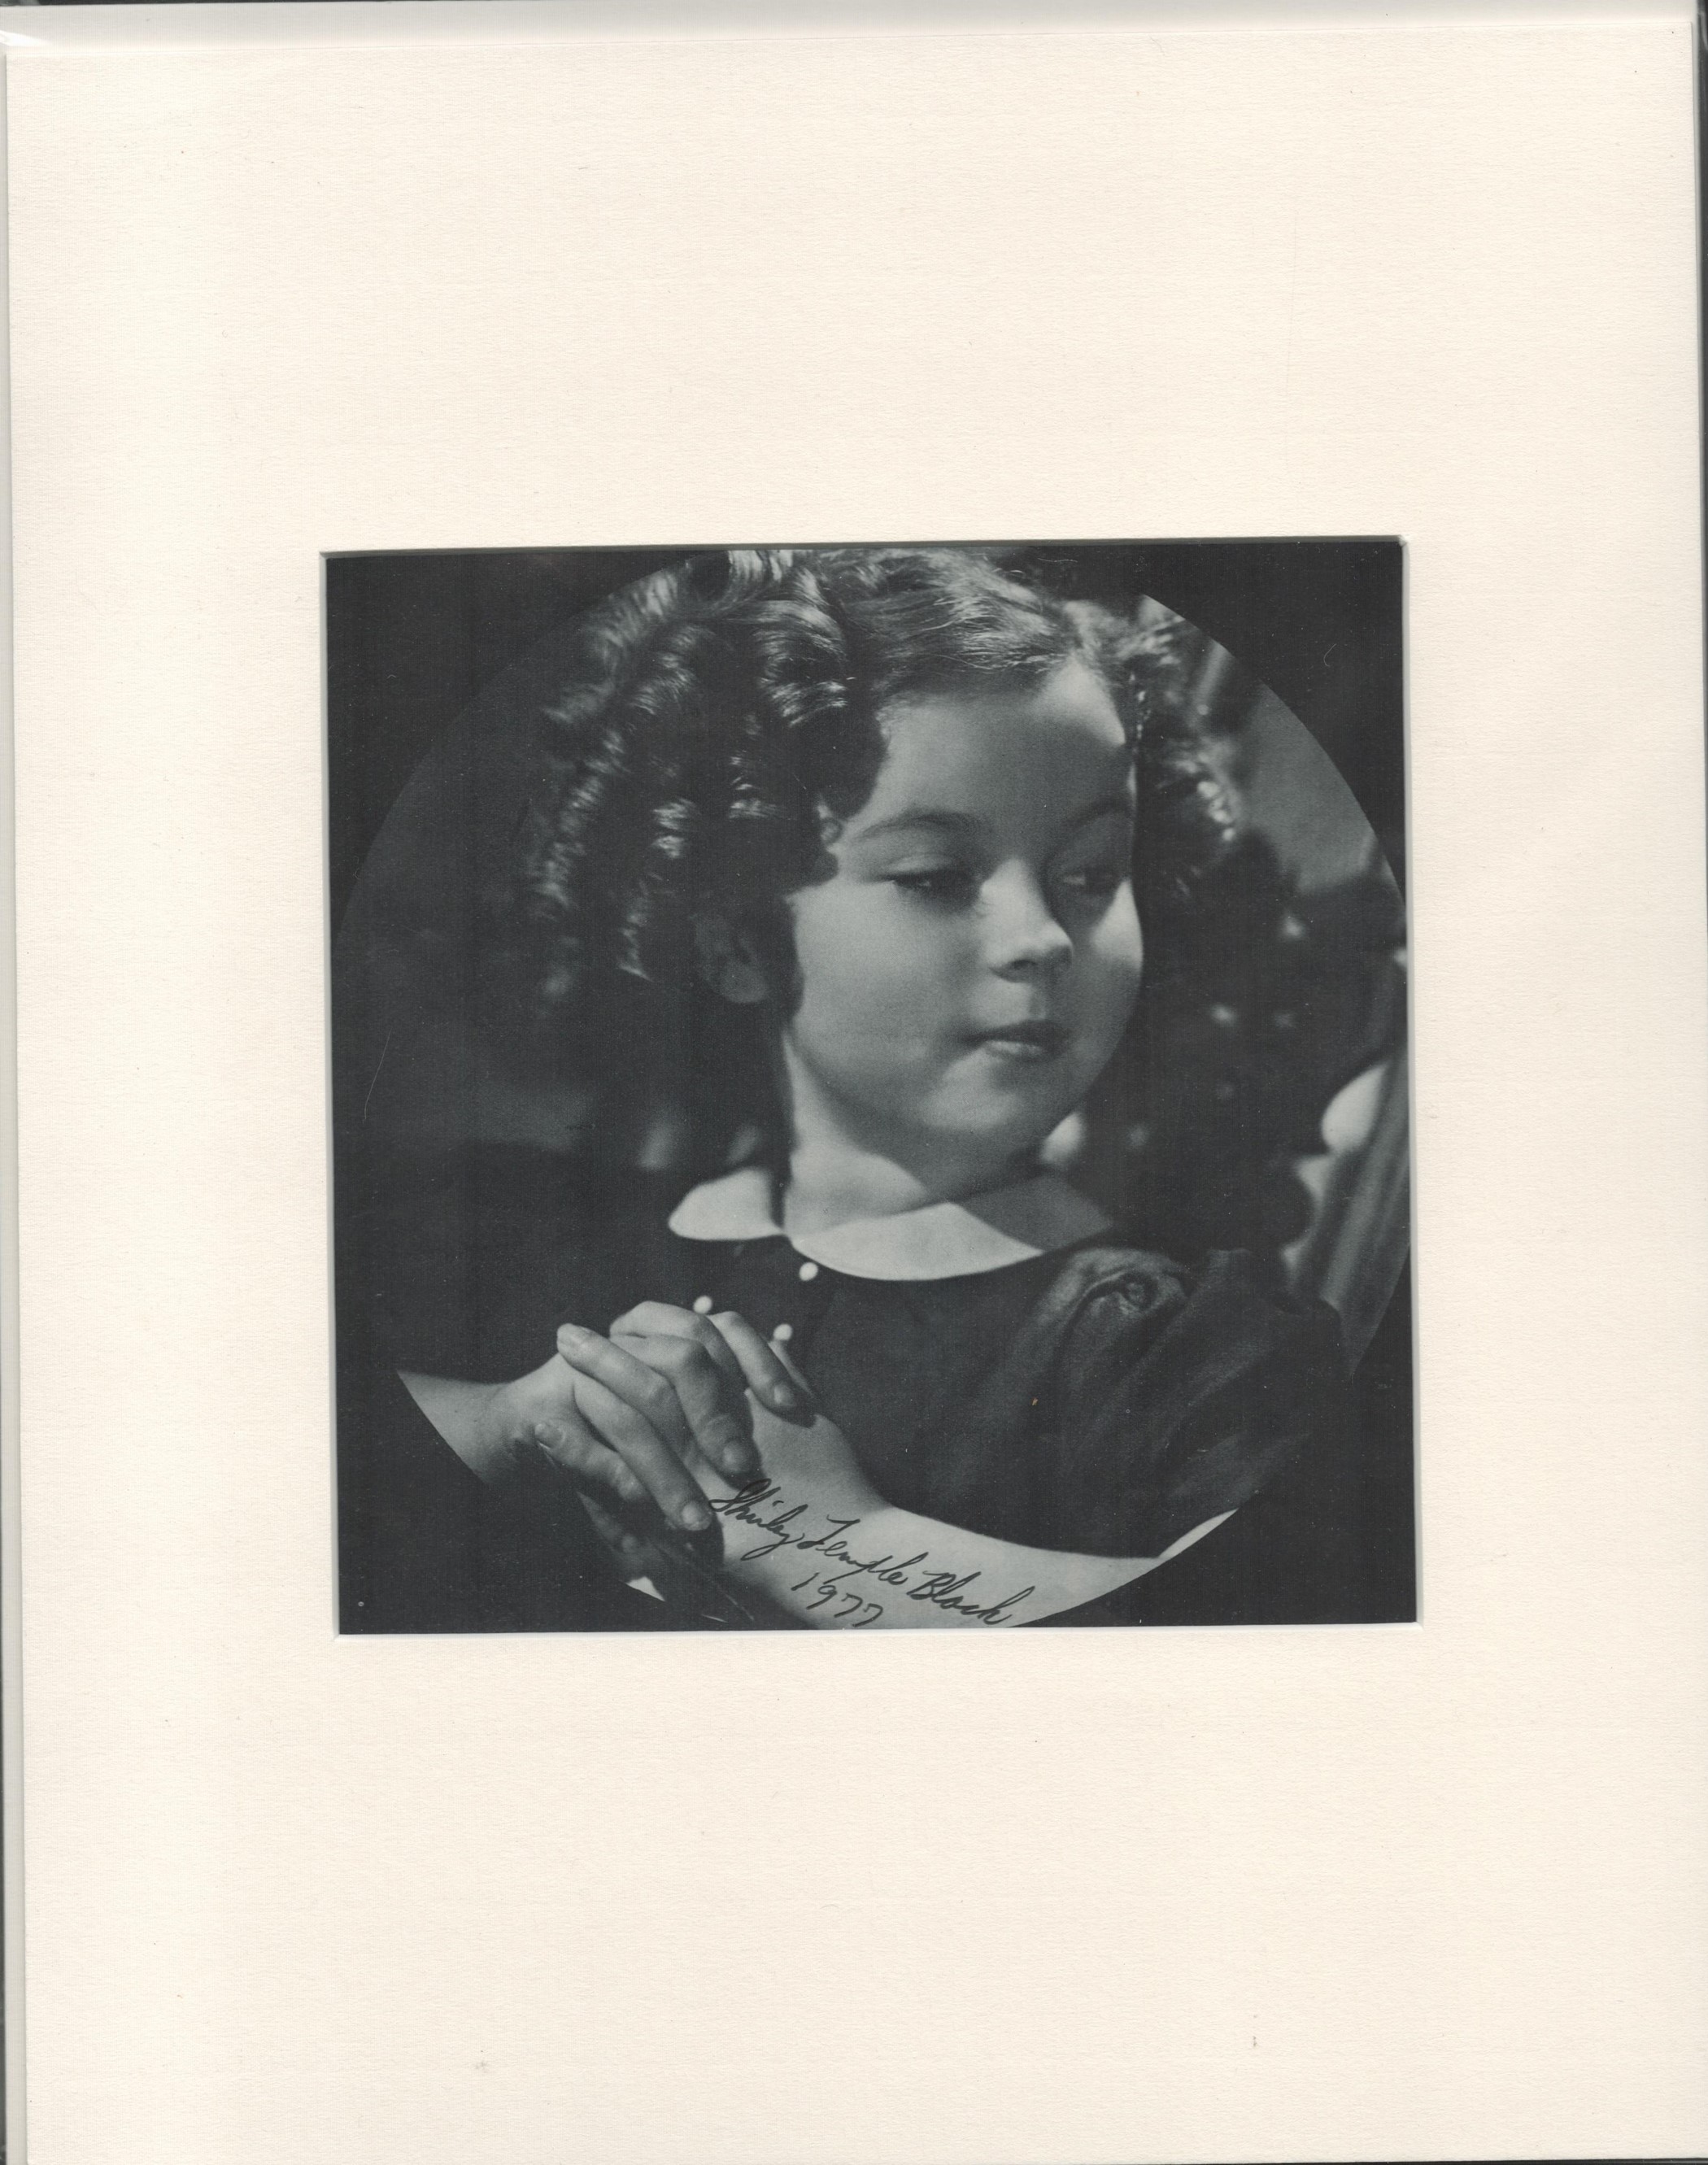 Shirley Temple Black signed 14x11 mounted black and white photo dated 1977. Good condition. All